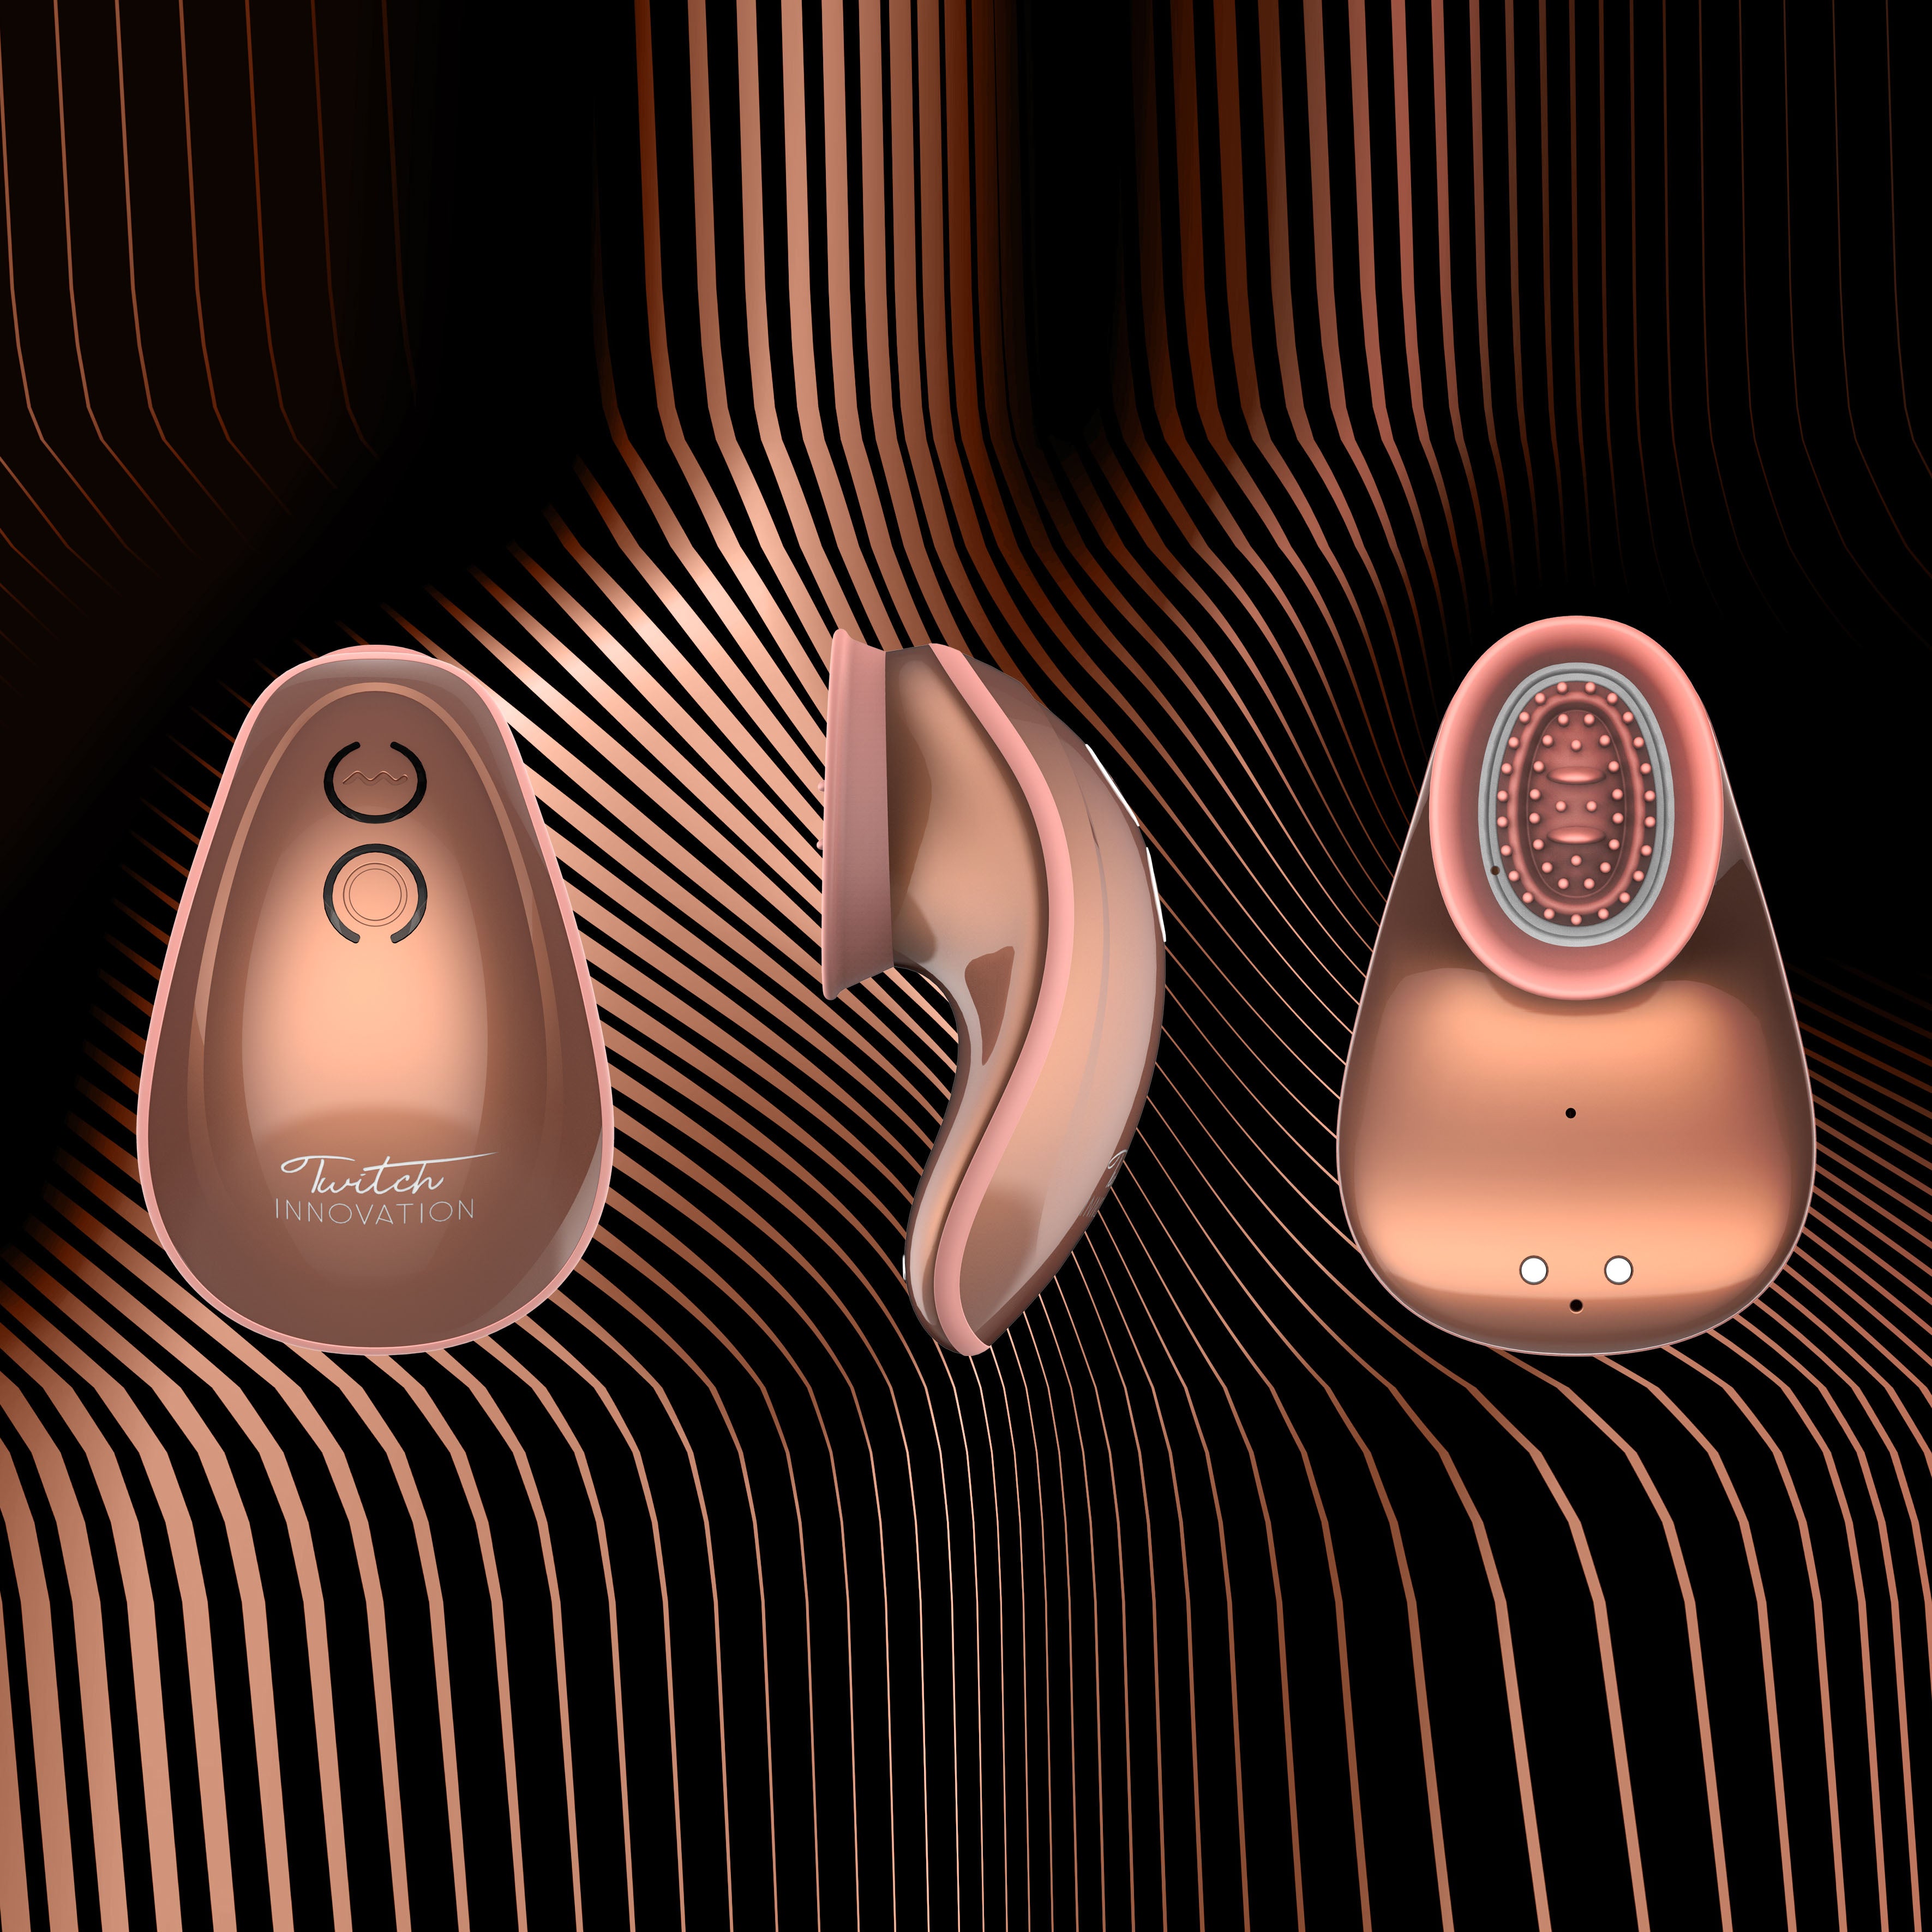 Twitch Rose Gold Hands Free Suction And Vibration Toy > Sex Toys For Ladies > Clitoral Vibrators and Stimulators 4.1 Inches, Clitoral Vibrators and Stimulators, Female, NEWLY-IMPORTED, Silico